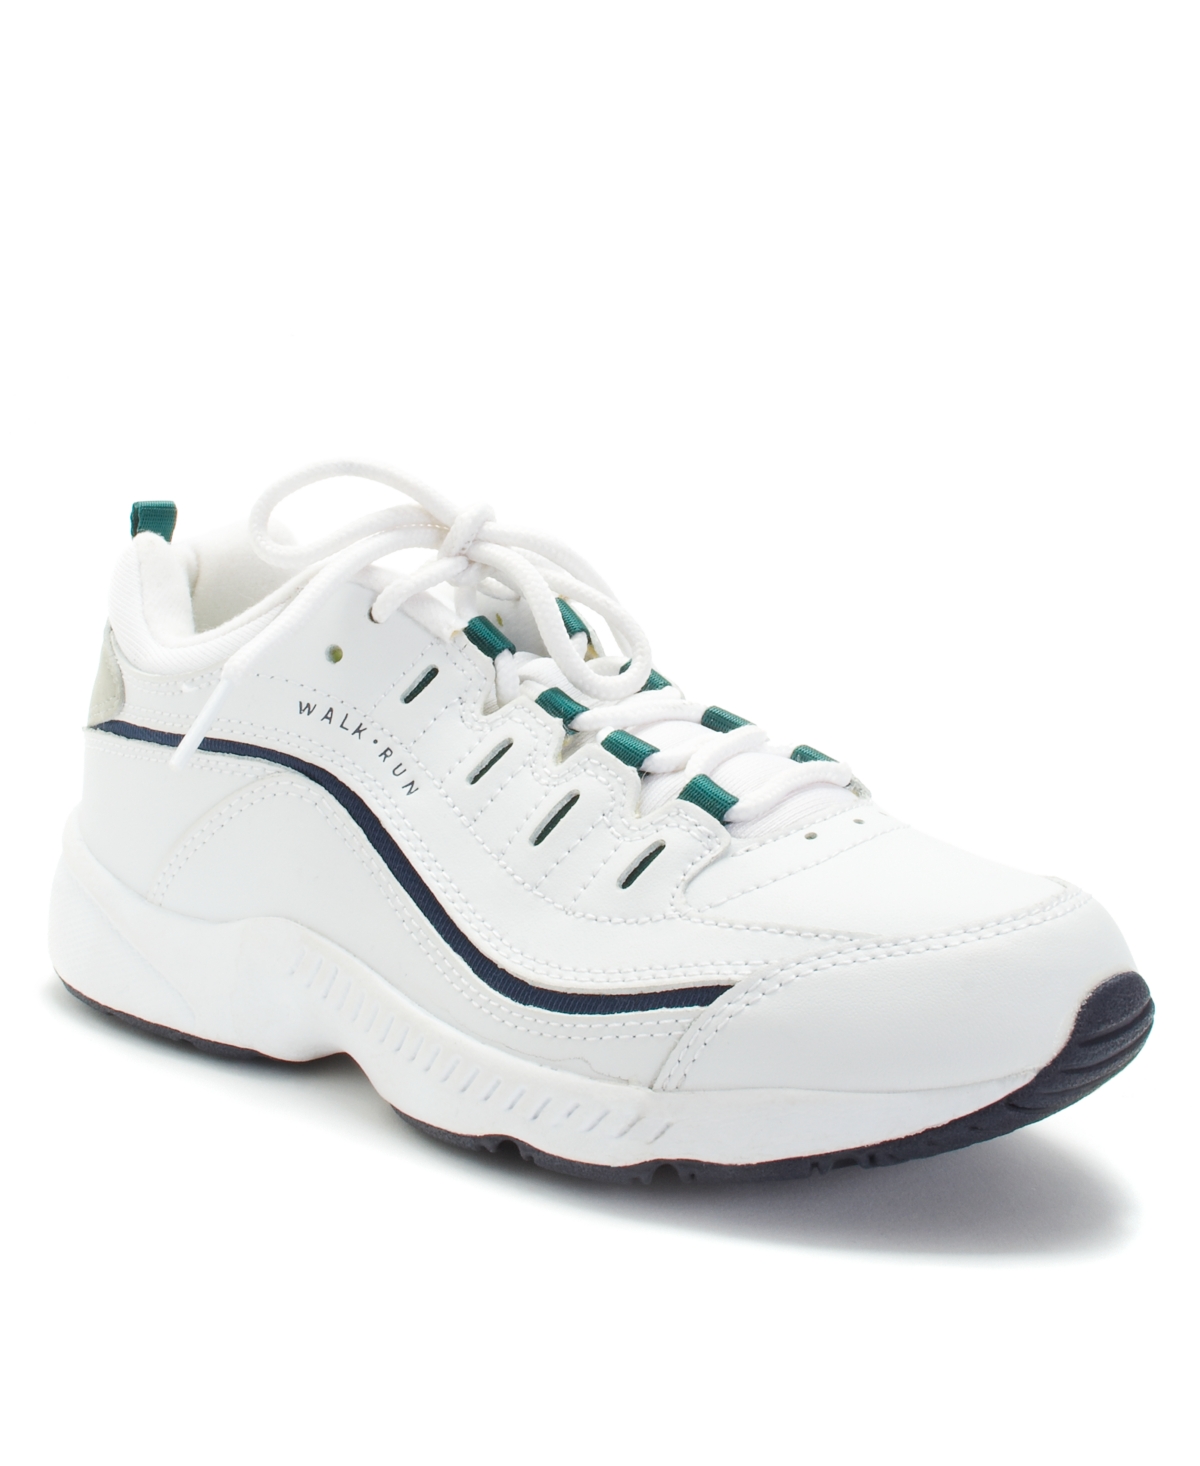 UPC 029005264378 product image for Easy Spirit Women's Romy Round Toe Casual Lace Up Walking Shoes Women's Shoes | upcitemdb.com